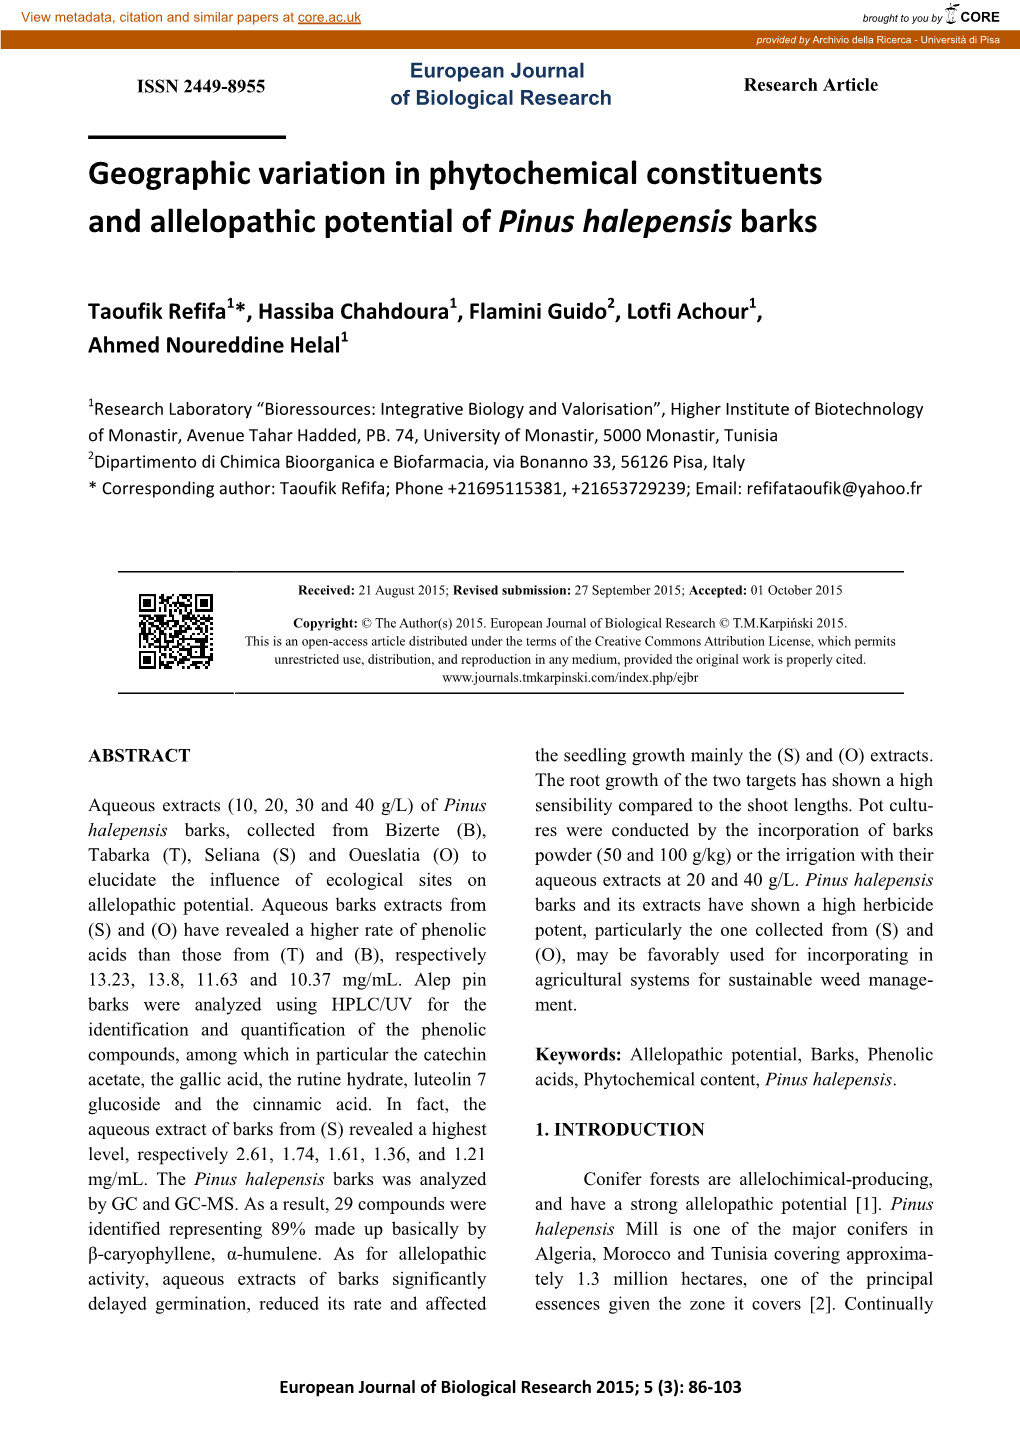 Geographic Variation in Phytochemical Constituents and Allelopathic Potential of Pinus Halepensis Barks